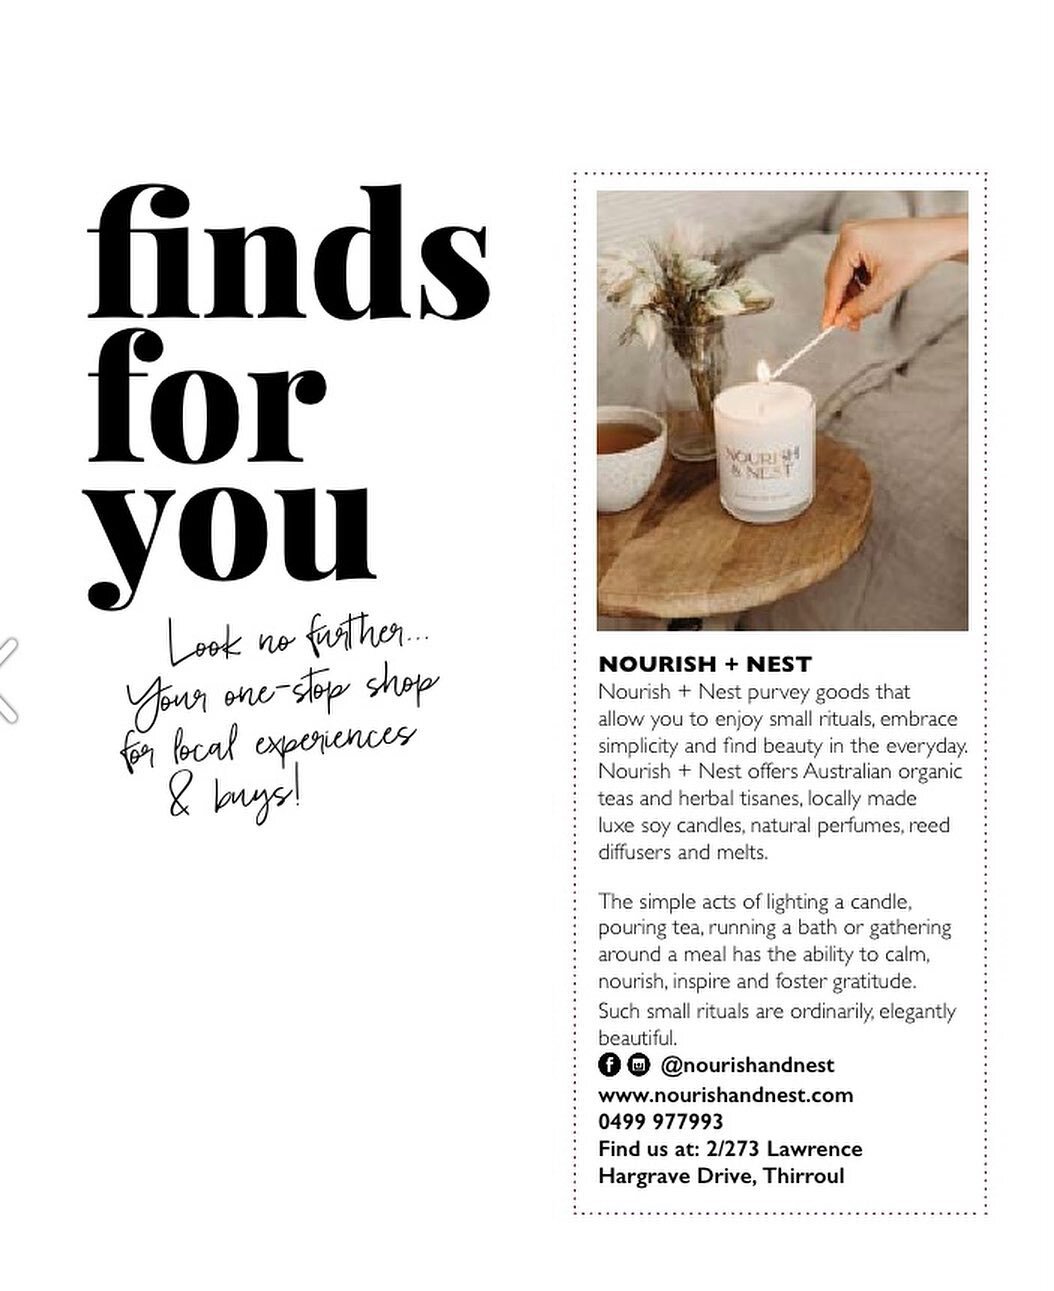 FINDS FOR YOU// ⭐️🤍
Look no further&hellip;. Your one- stop shop for local buys &amp; experiences. 
@nourishandnest @miniwildflower @aisle6ix @truebluefloorcare @coastkids.aus

If you would like to book a FFY for our upcoming winter issue, send us a